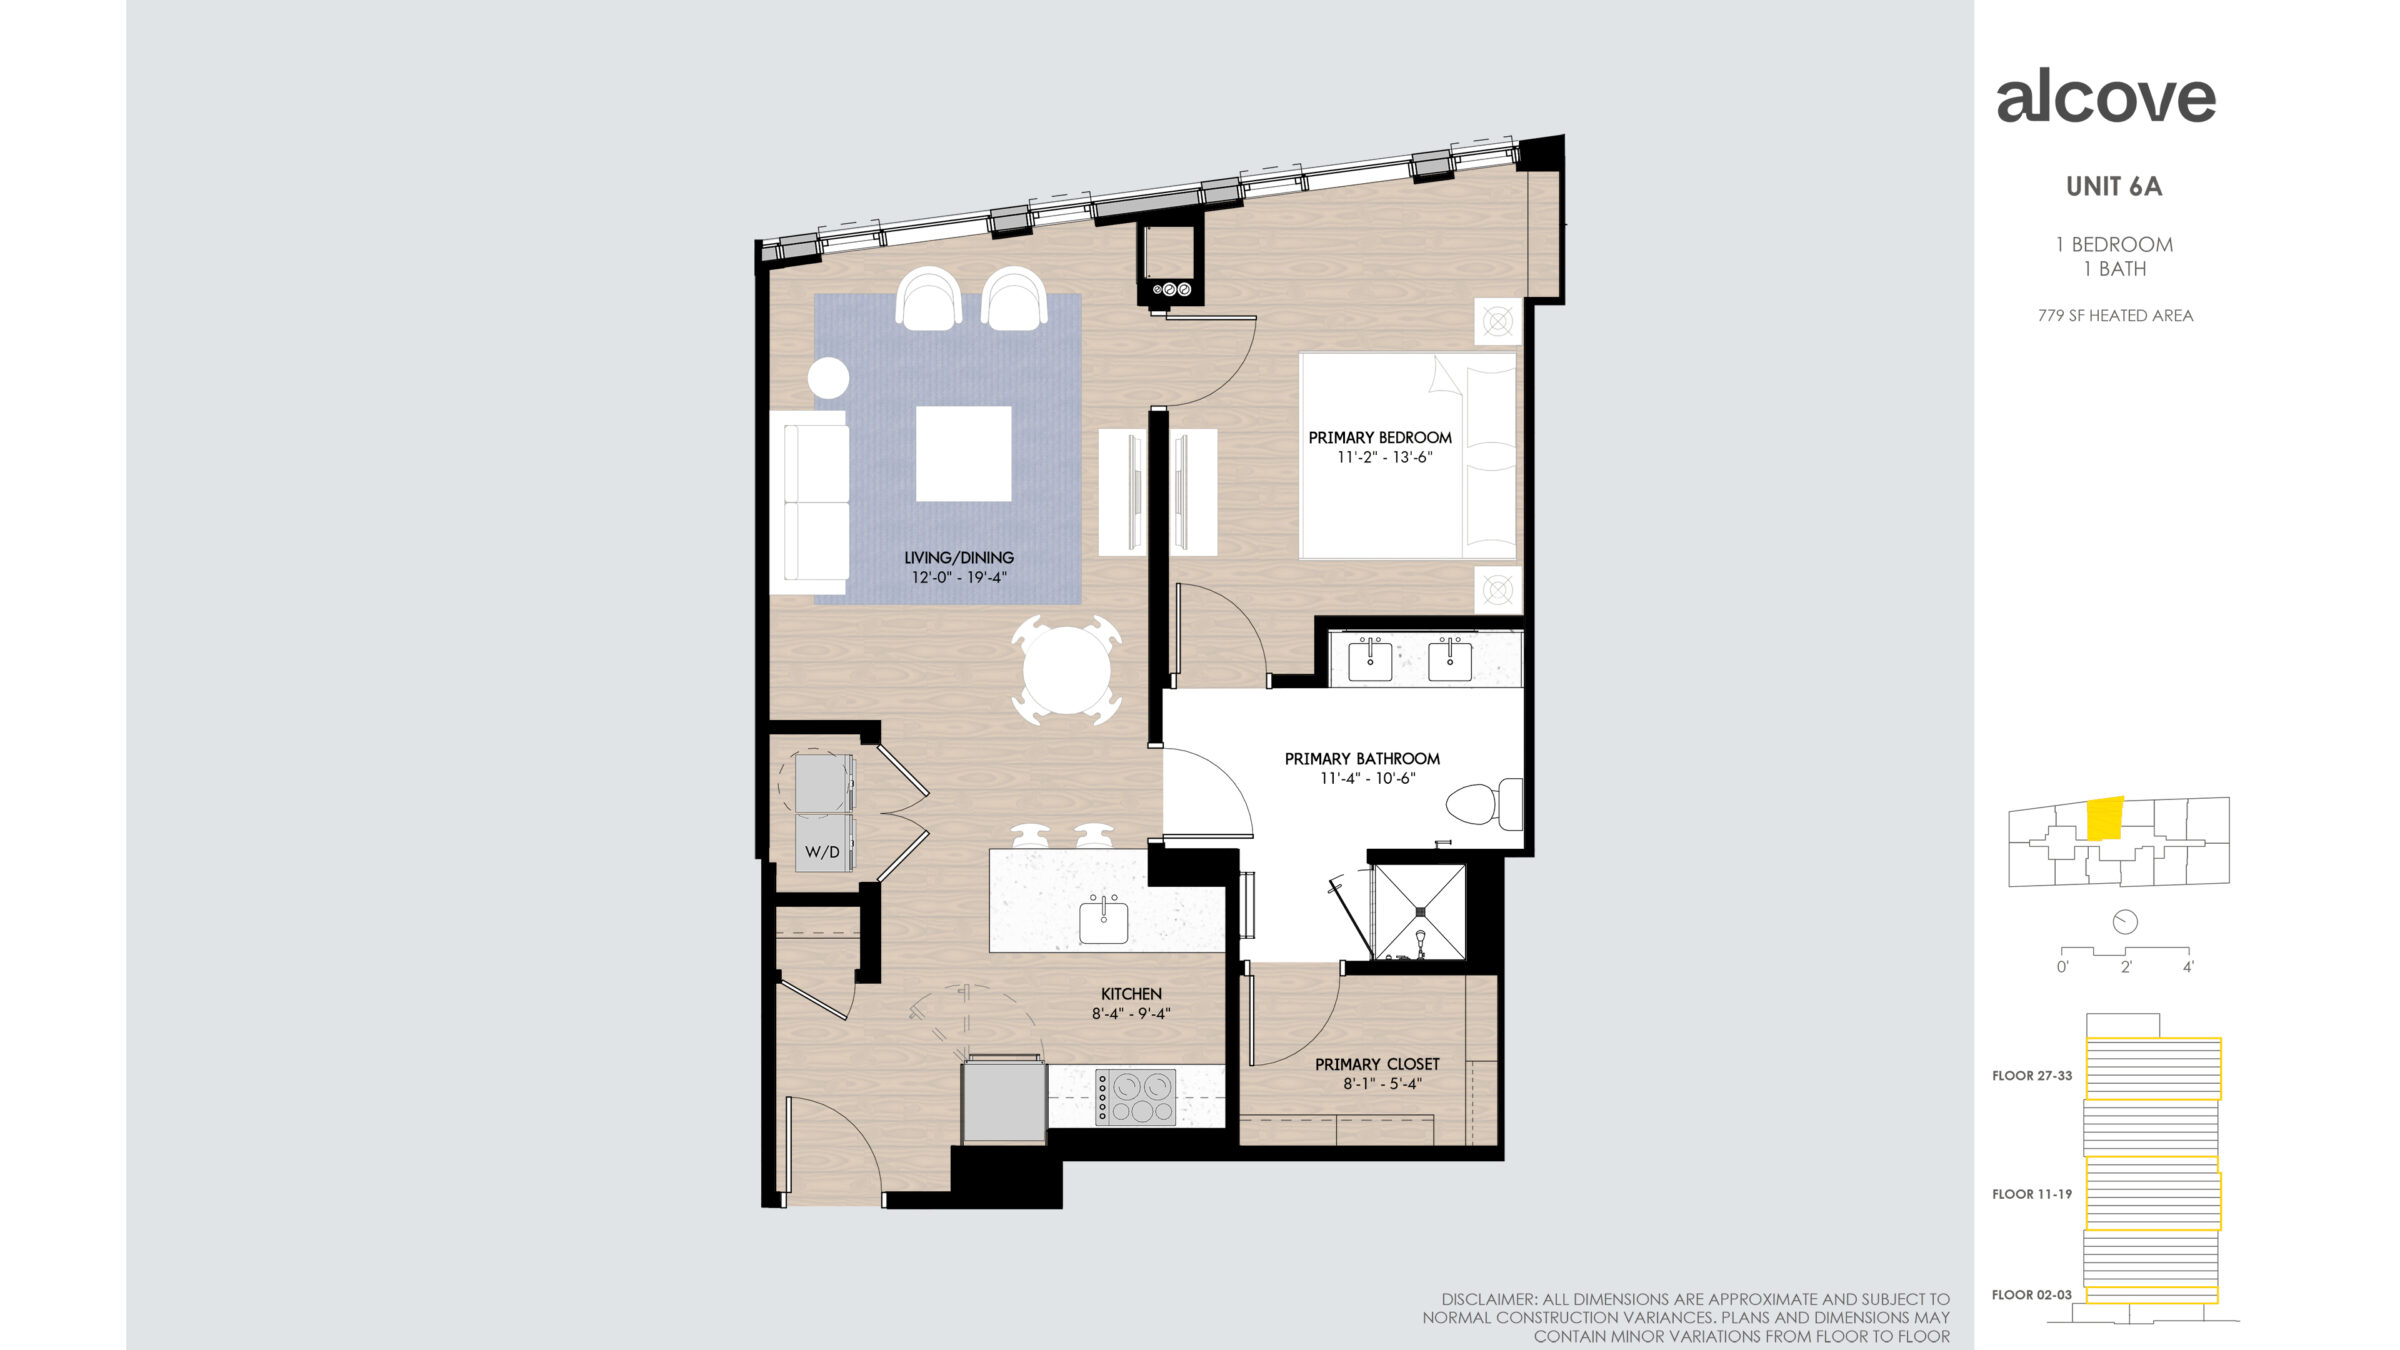 Image reads: UNIT 6A 1 BEDROOM 1 BATH 779 SF HEATED AREA Floor 27-33 Floor 11-19 Floor 02-03   Disclaimer: all dimensions are approximate and subject to normal construction variances. Plans and dimensions may contain minor variations from floor to floor. 